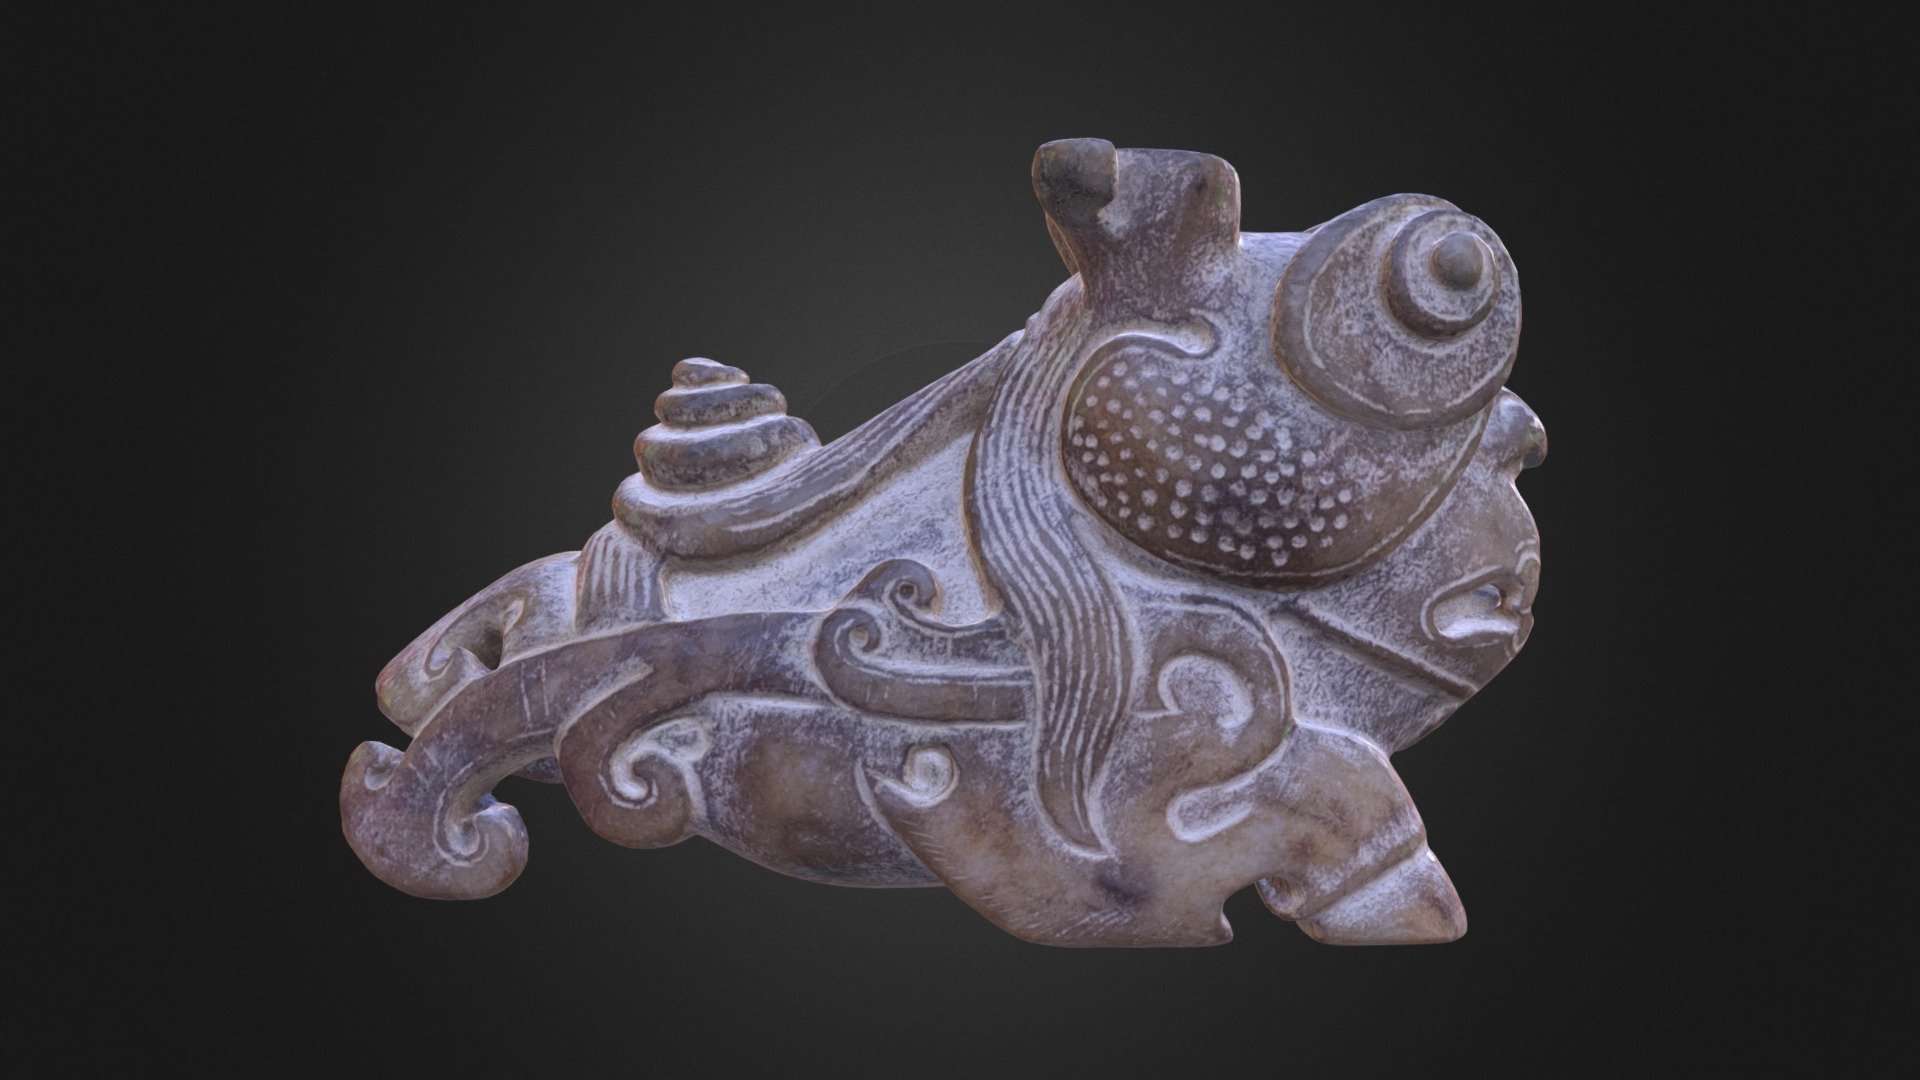 I don't know what is this biological, it's very ancient jade carving.
Photogrammetry from 392 photos 3d model